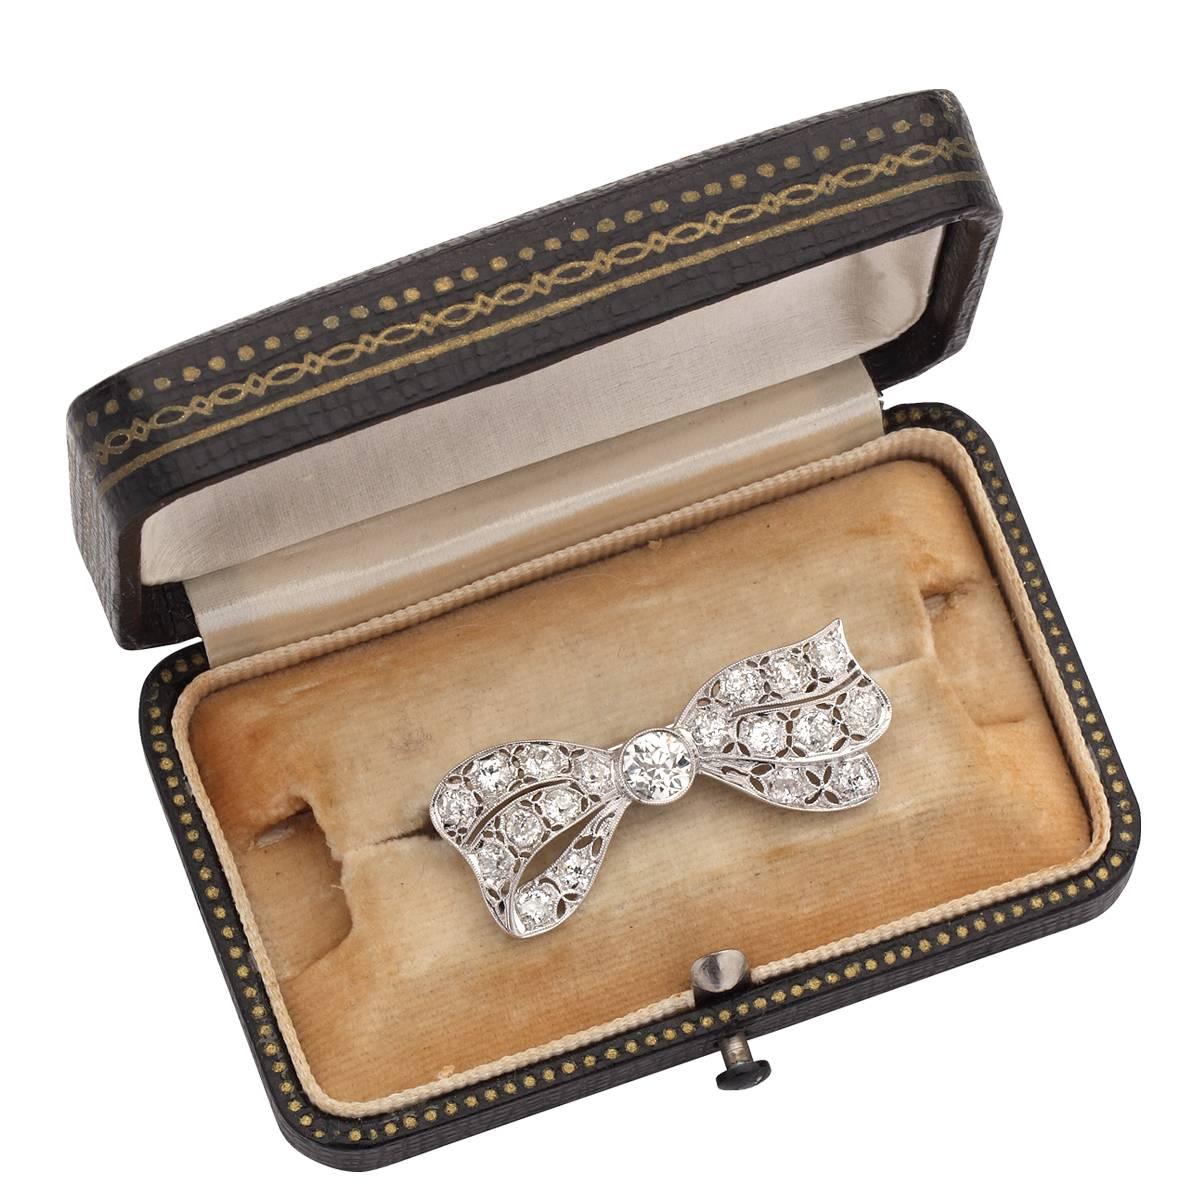 Platinum Brooch Set with 3.50 Carats of Old European Cut Diamonds, H Color, VS Clarity.